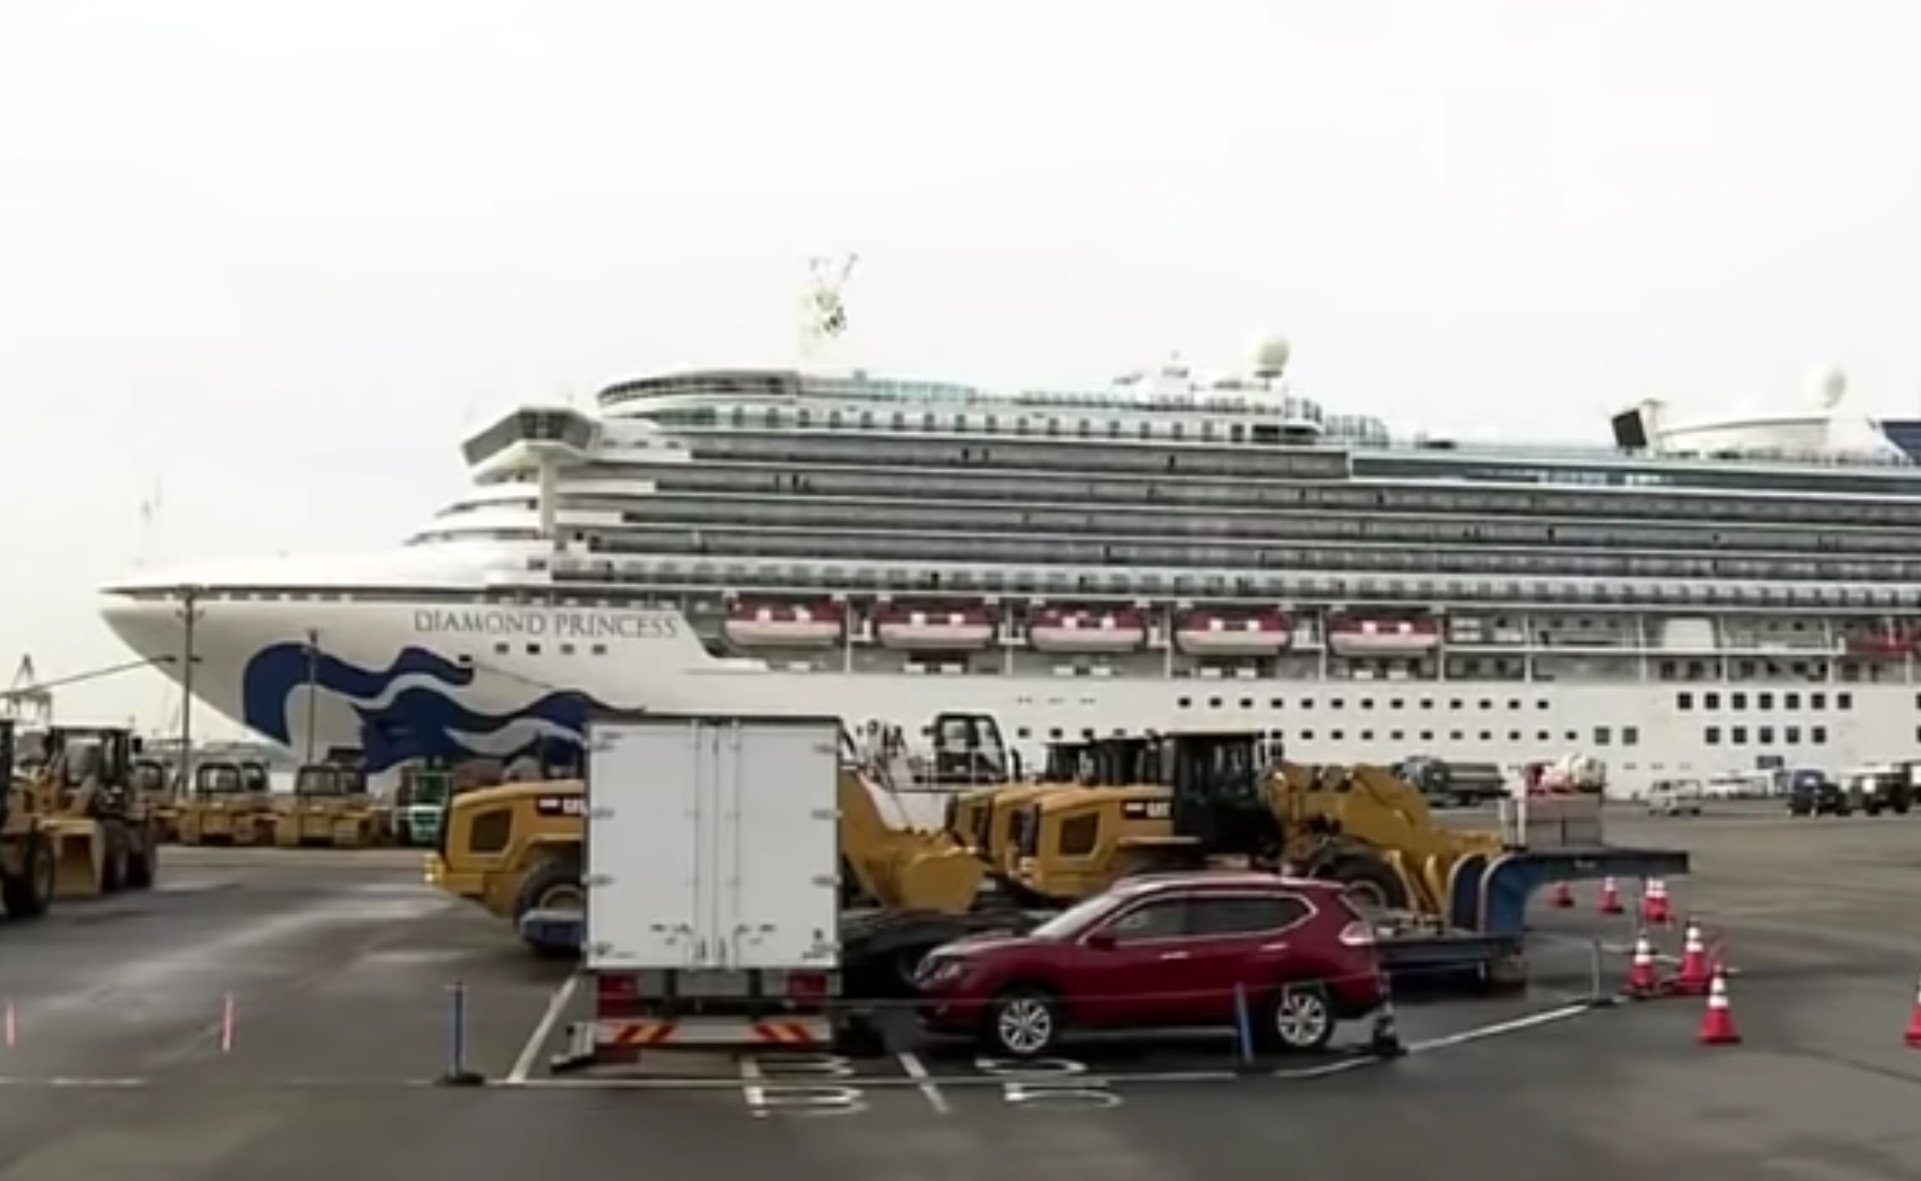 The Diamond Princess cruise ship is docked in the port of Yokohama after being quarantined due to a coronavirus outbreak on board. Screengrab via YouTube.